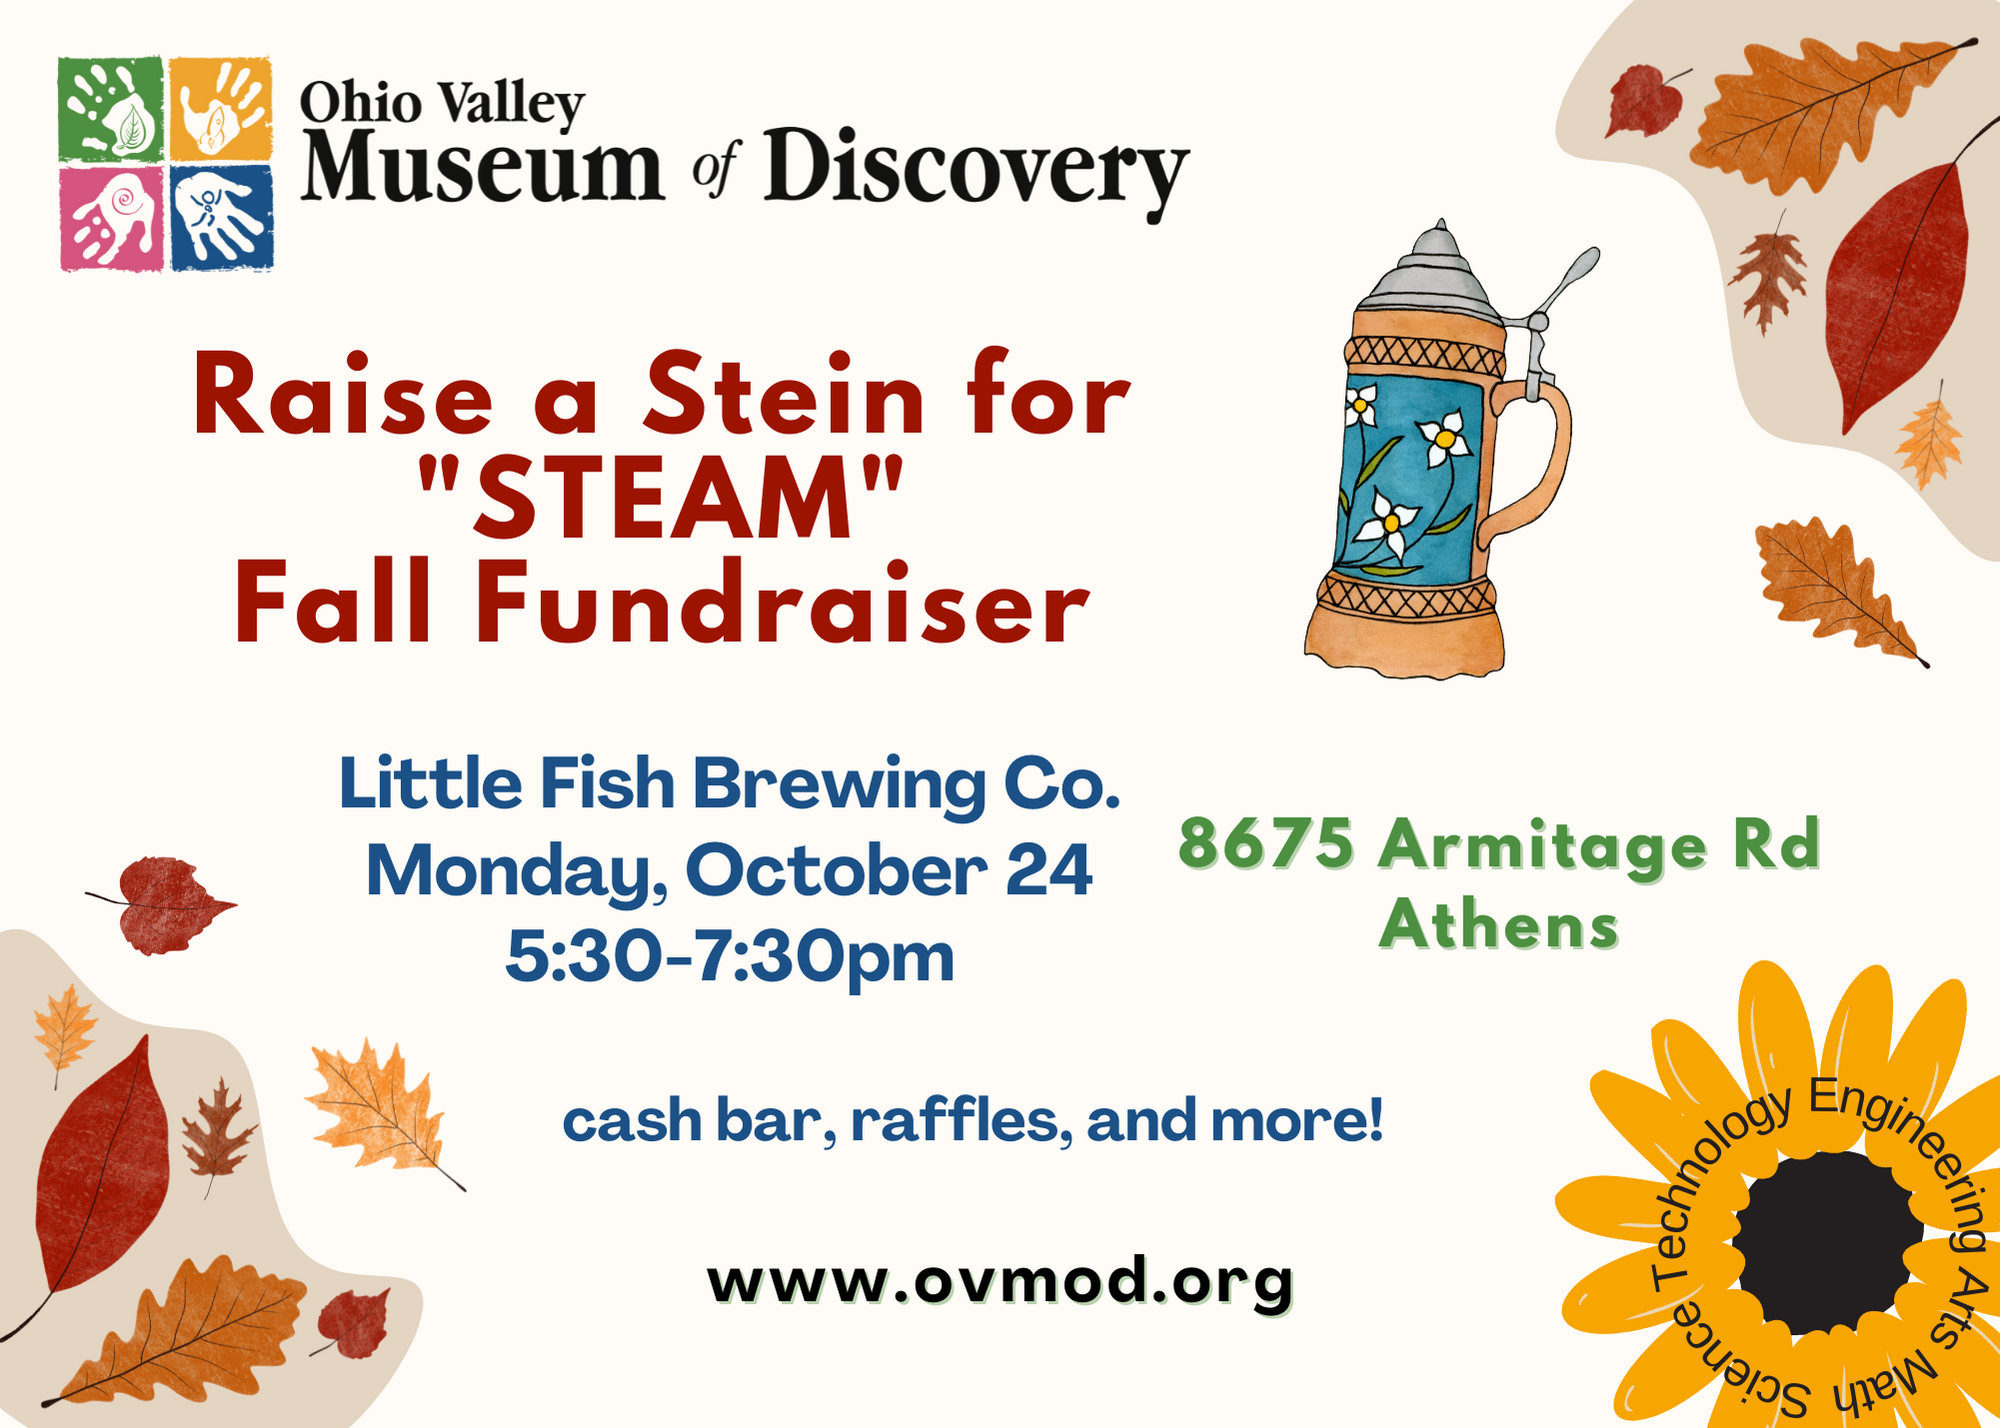 A graphic reading: Ohio Valley Museum of Discovery Raise a Stein for STEAM fall fundraiser Little fish brewing company monday, October 24 5:30 to 7:30 p.m. cash bar, raffles, and more! The graphic has cartoon flowers on it.